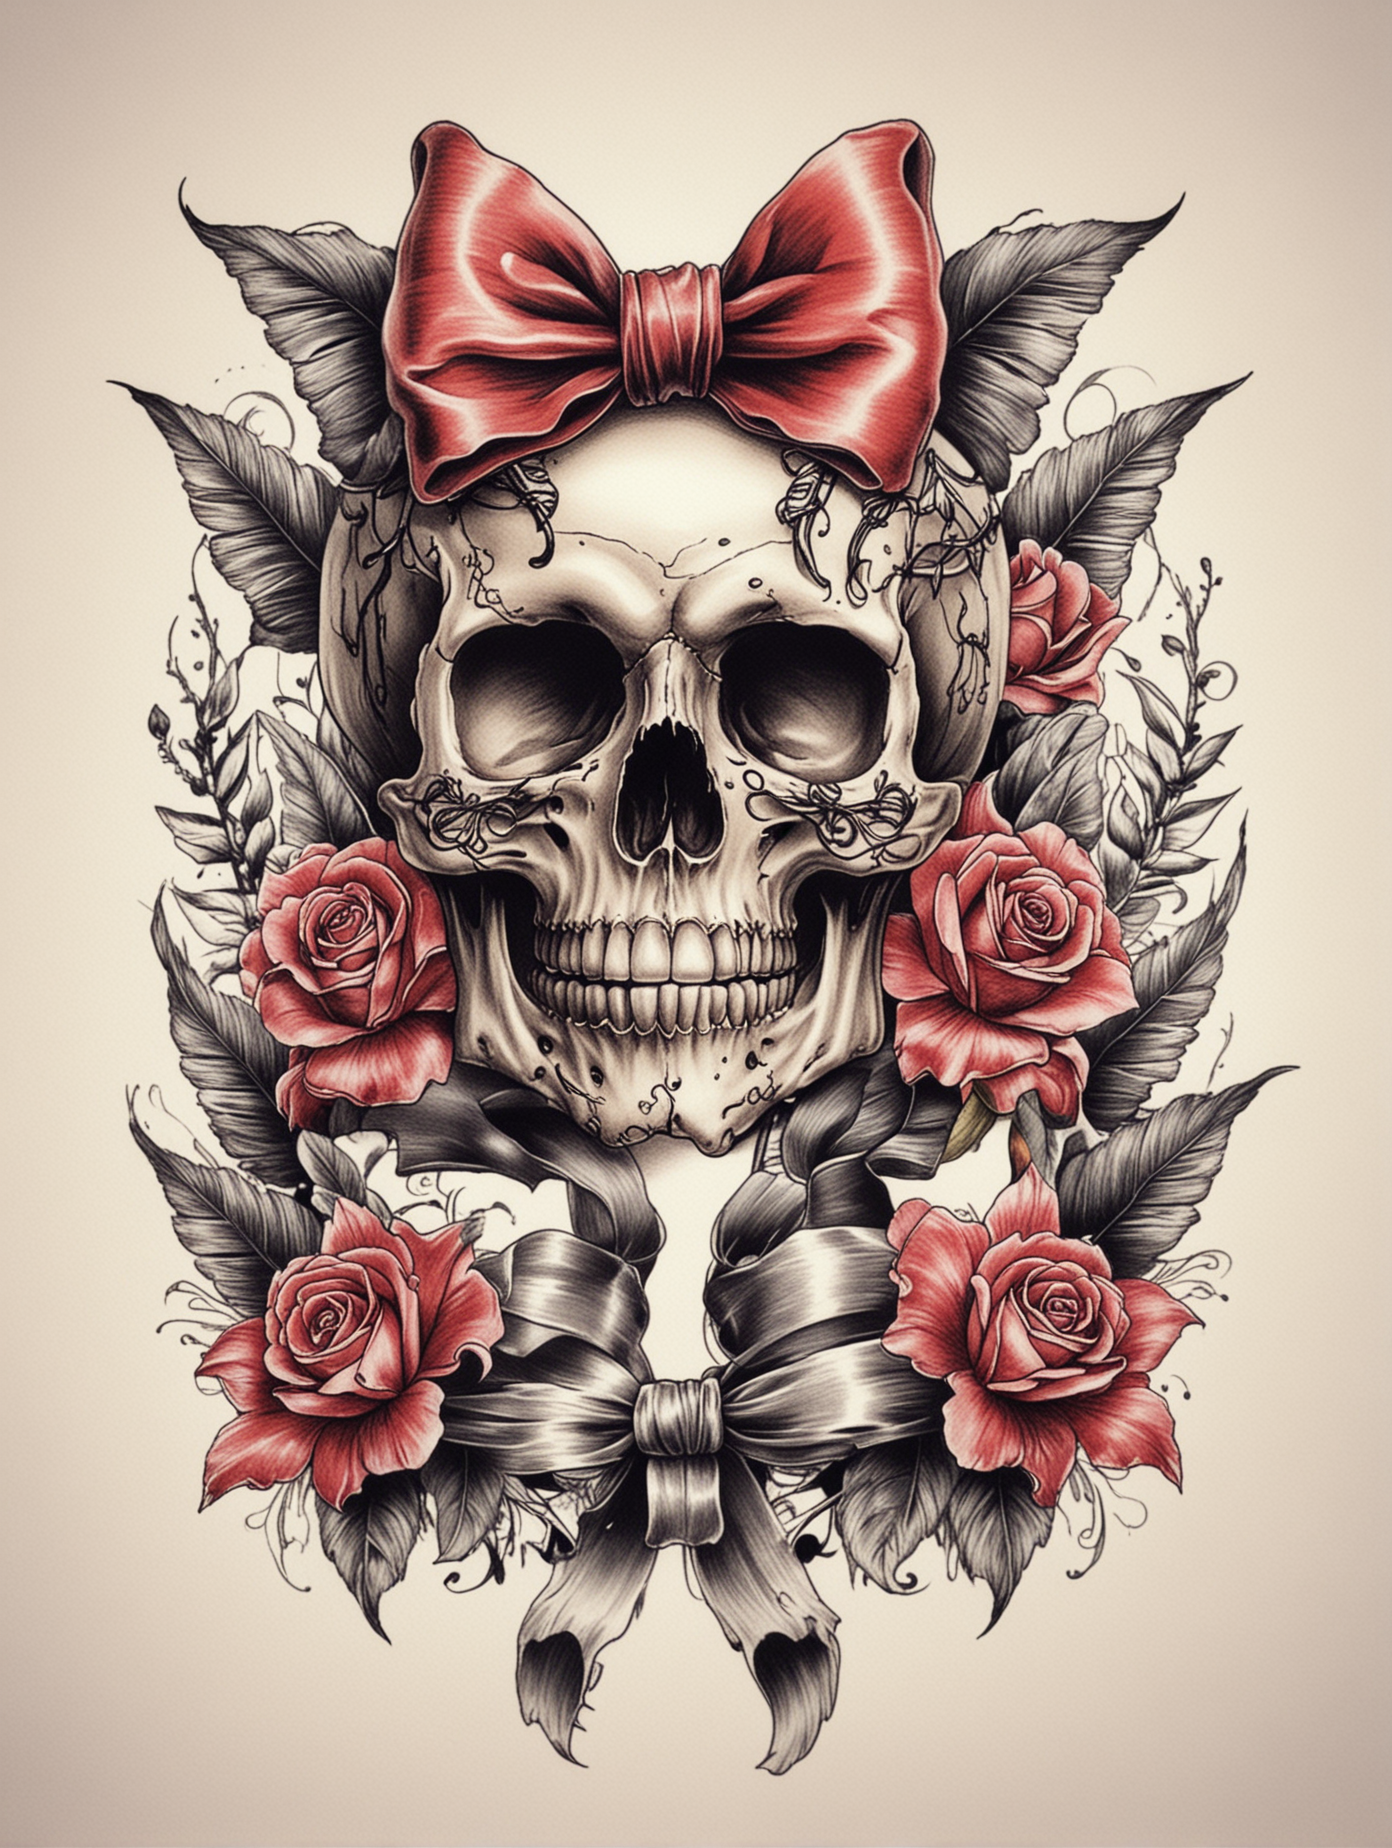 Oldschool tattoo design skull with bow, roses, white backround
